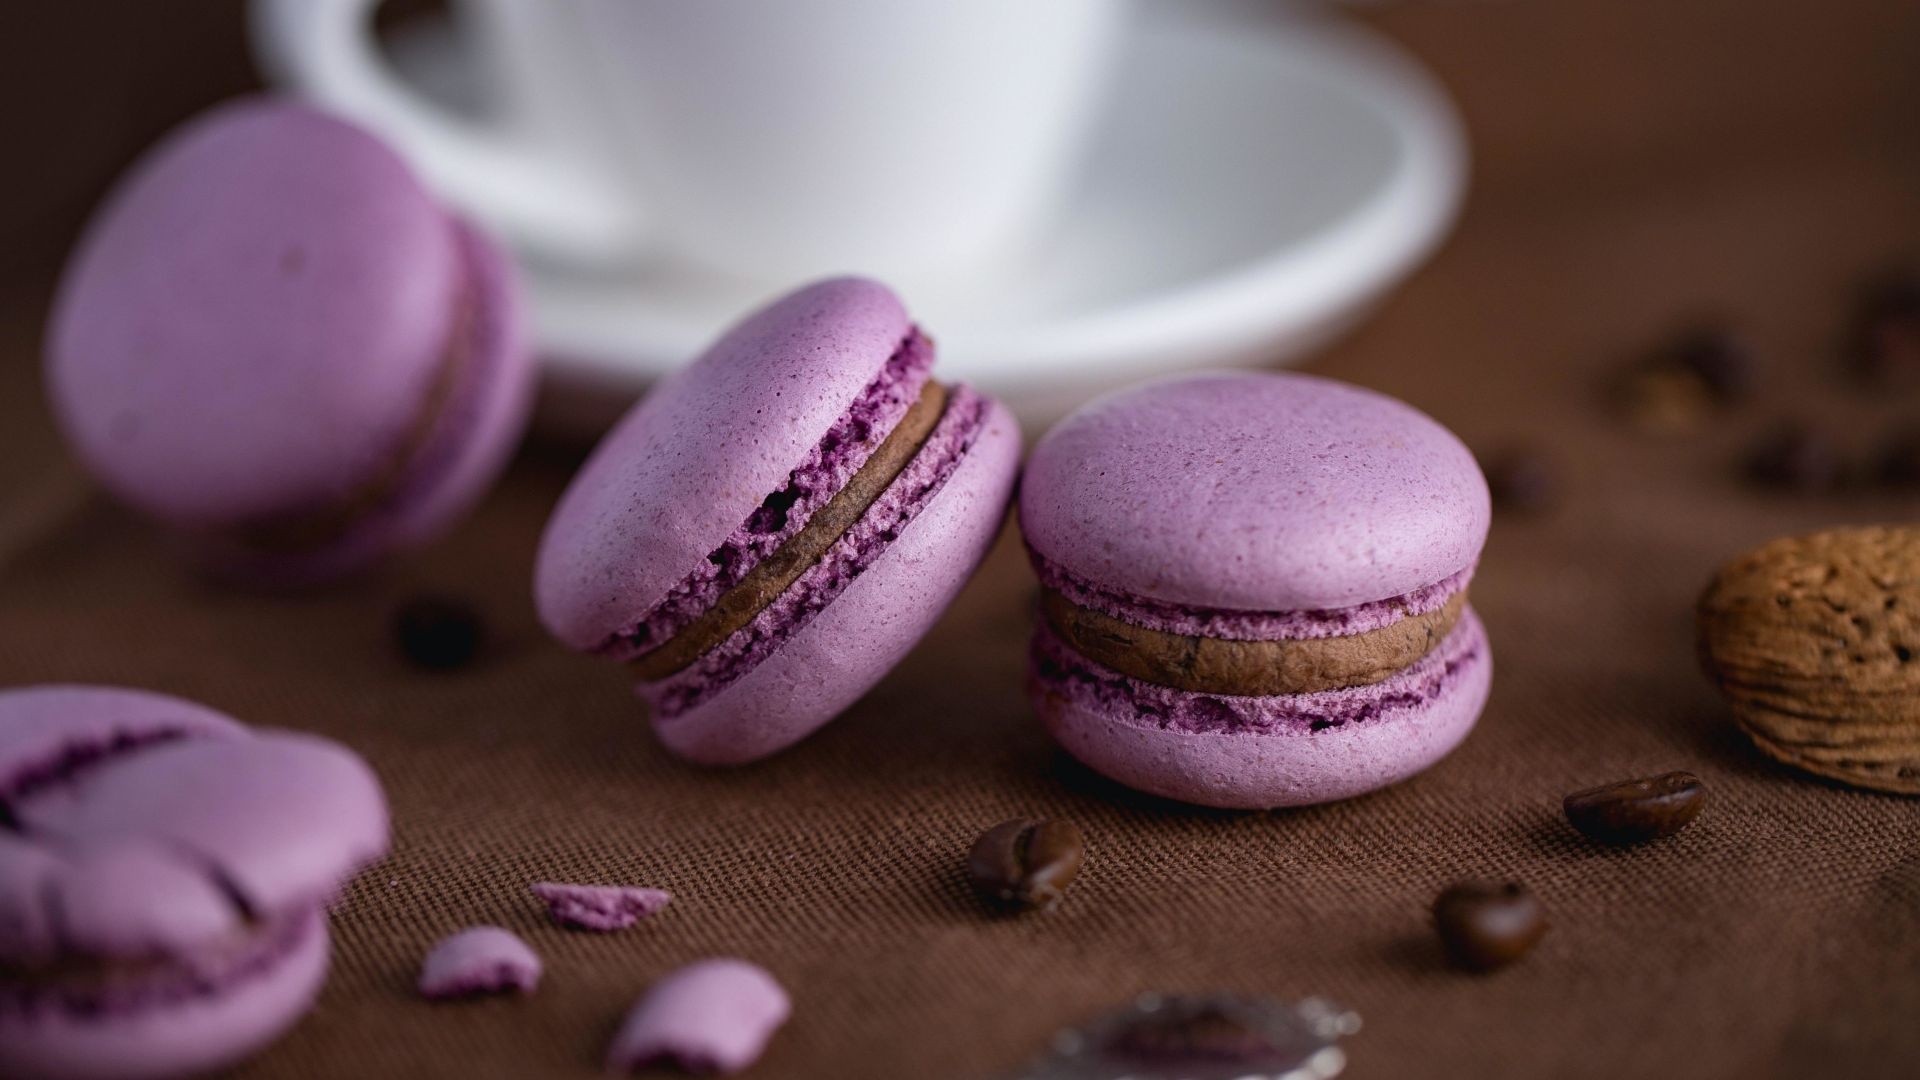 Macaron: Little sweet sandwiches made of meringue, almond flour and buttercream filling. 1920x1080 Full HD Background.